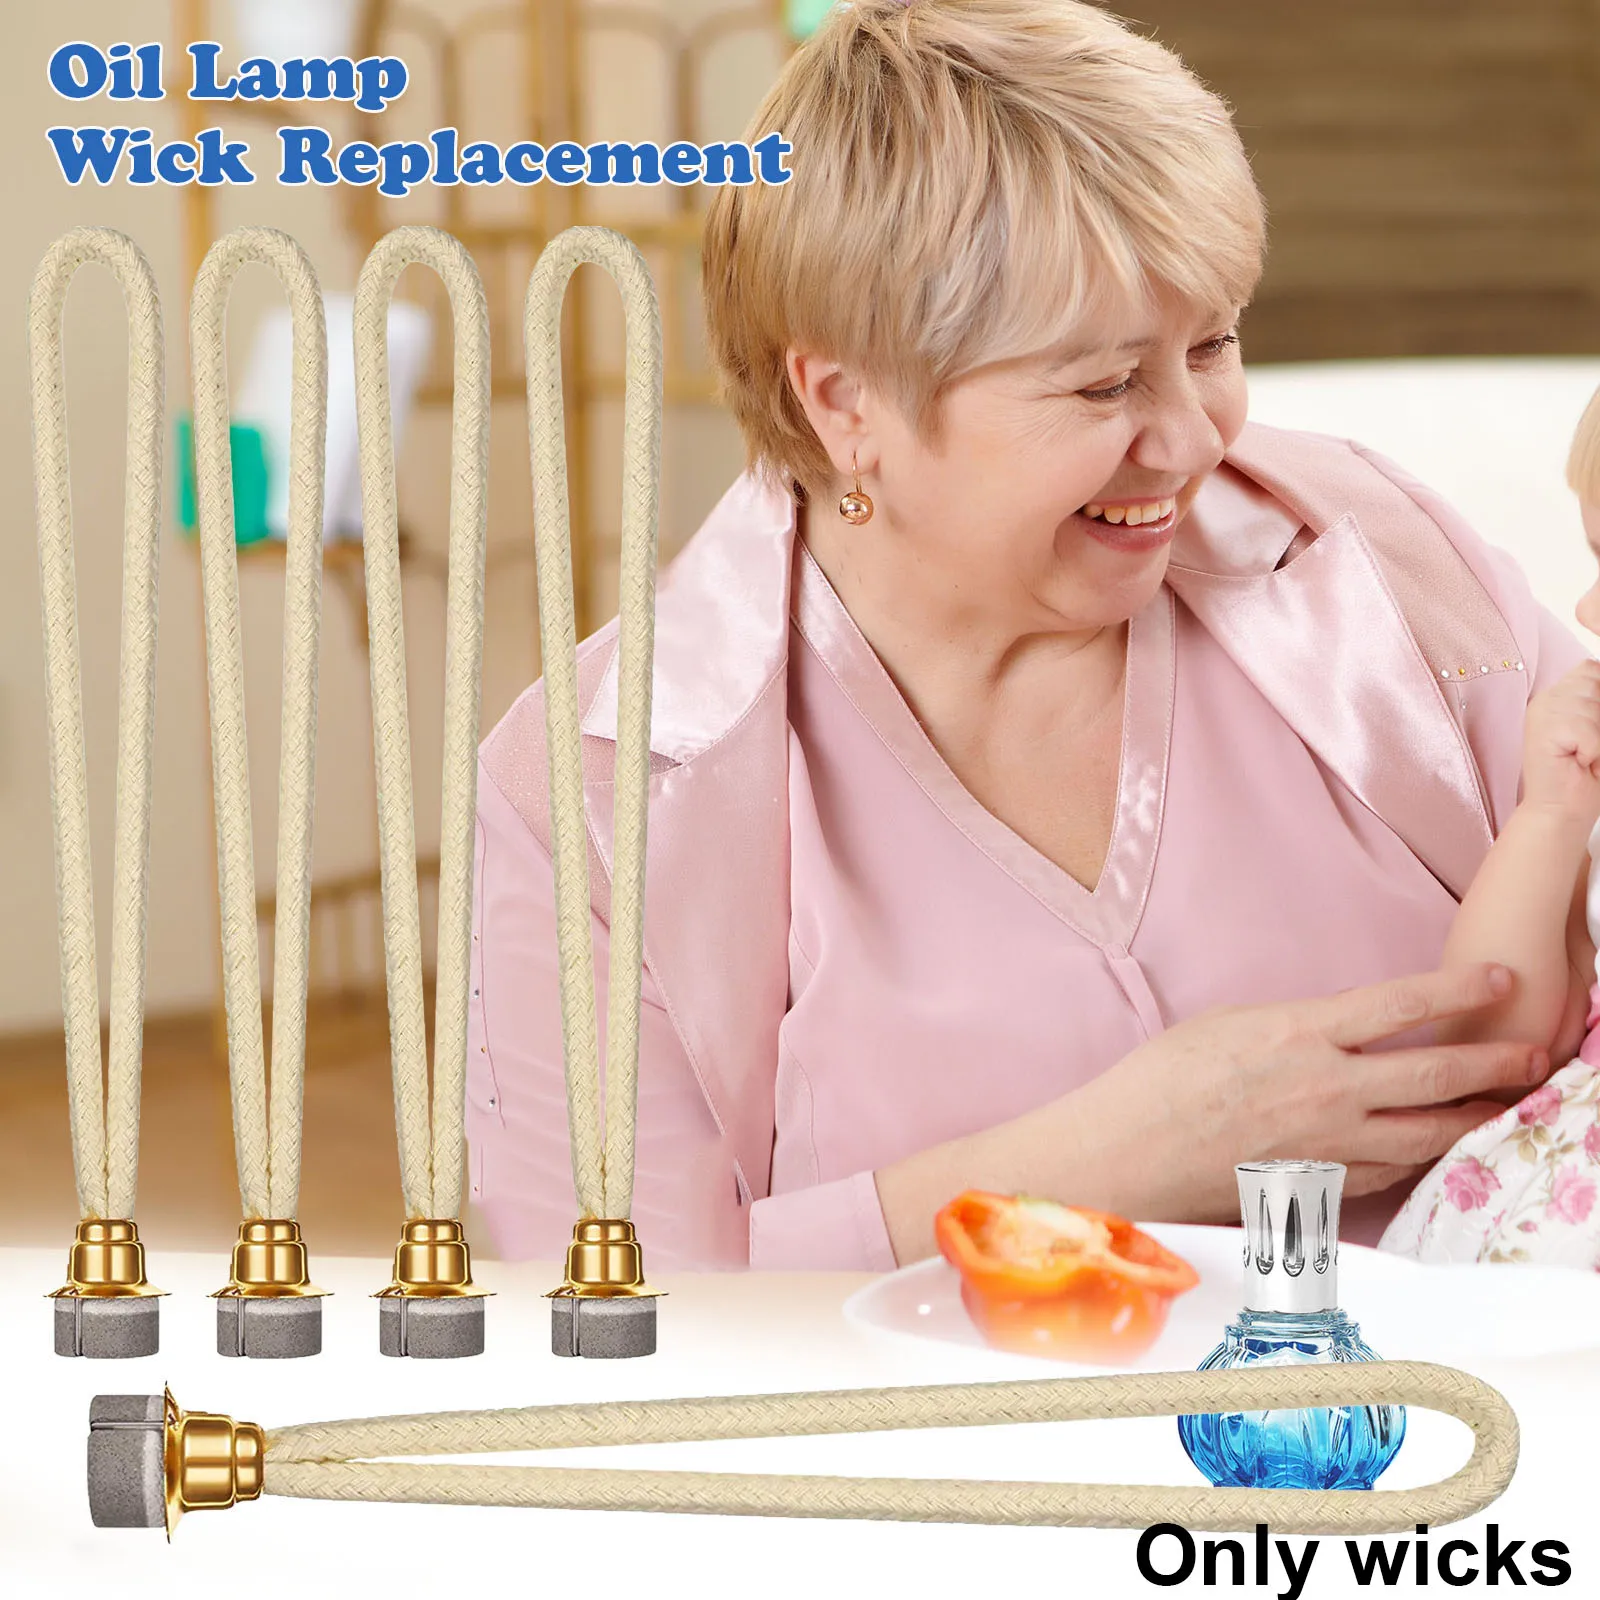 Wicks for Candlemaking 1 Set Replacement Fiber Wicks and Wicks Holder Set  Lamp Wicks for Oil Lamps Braiding Stand 